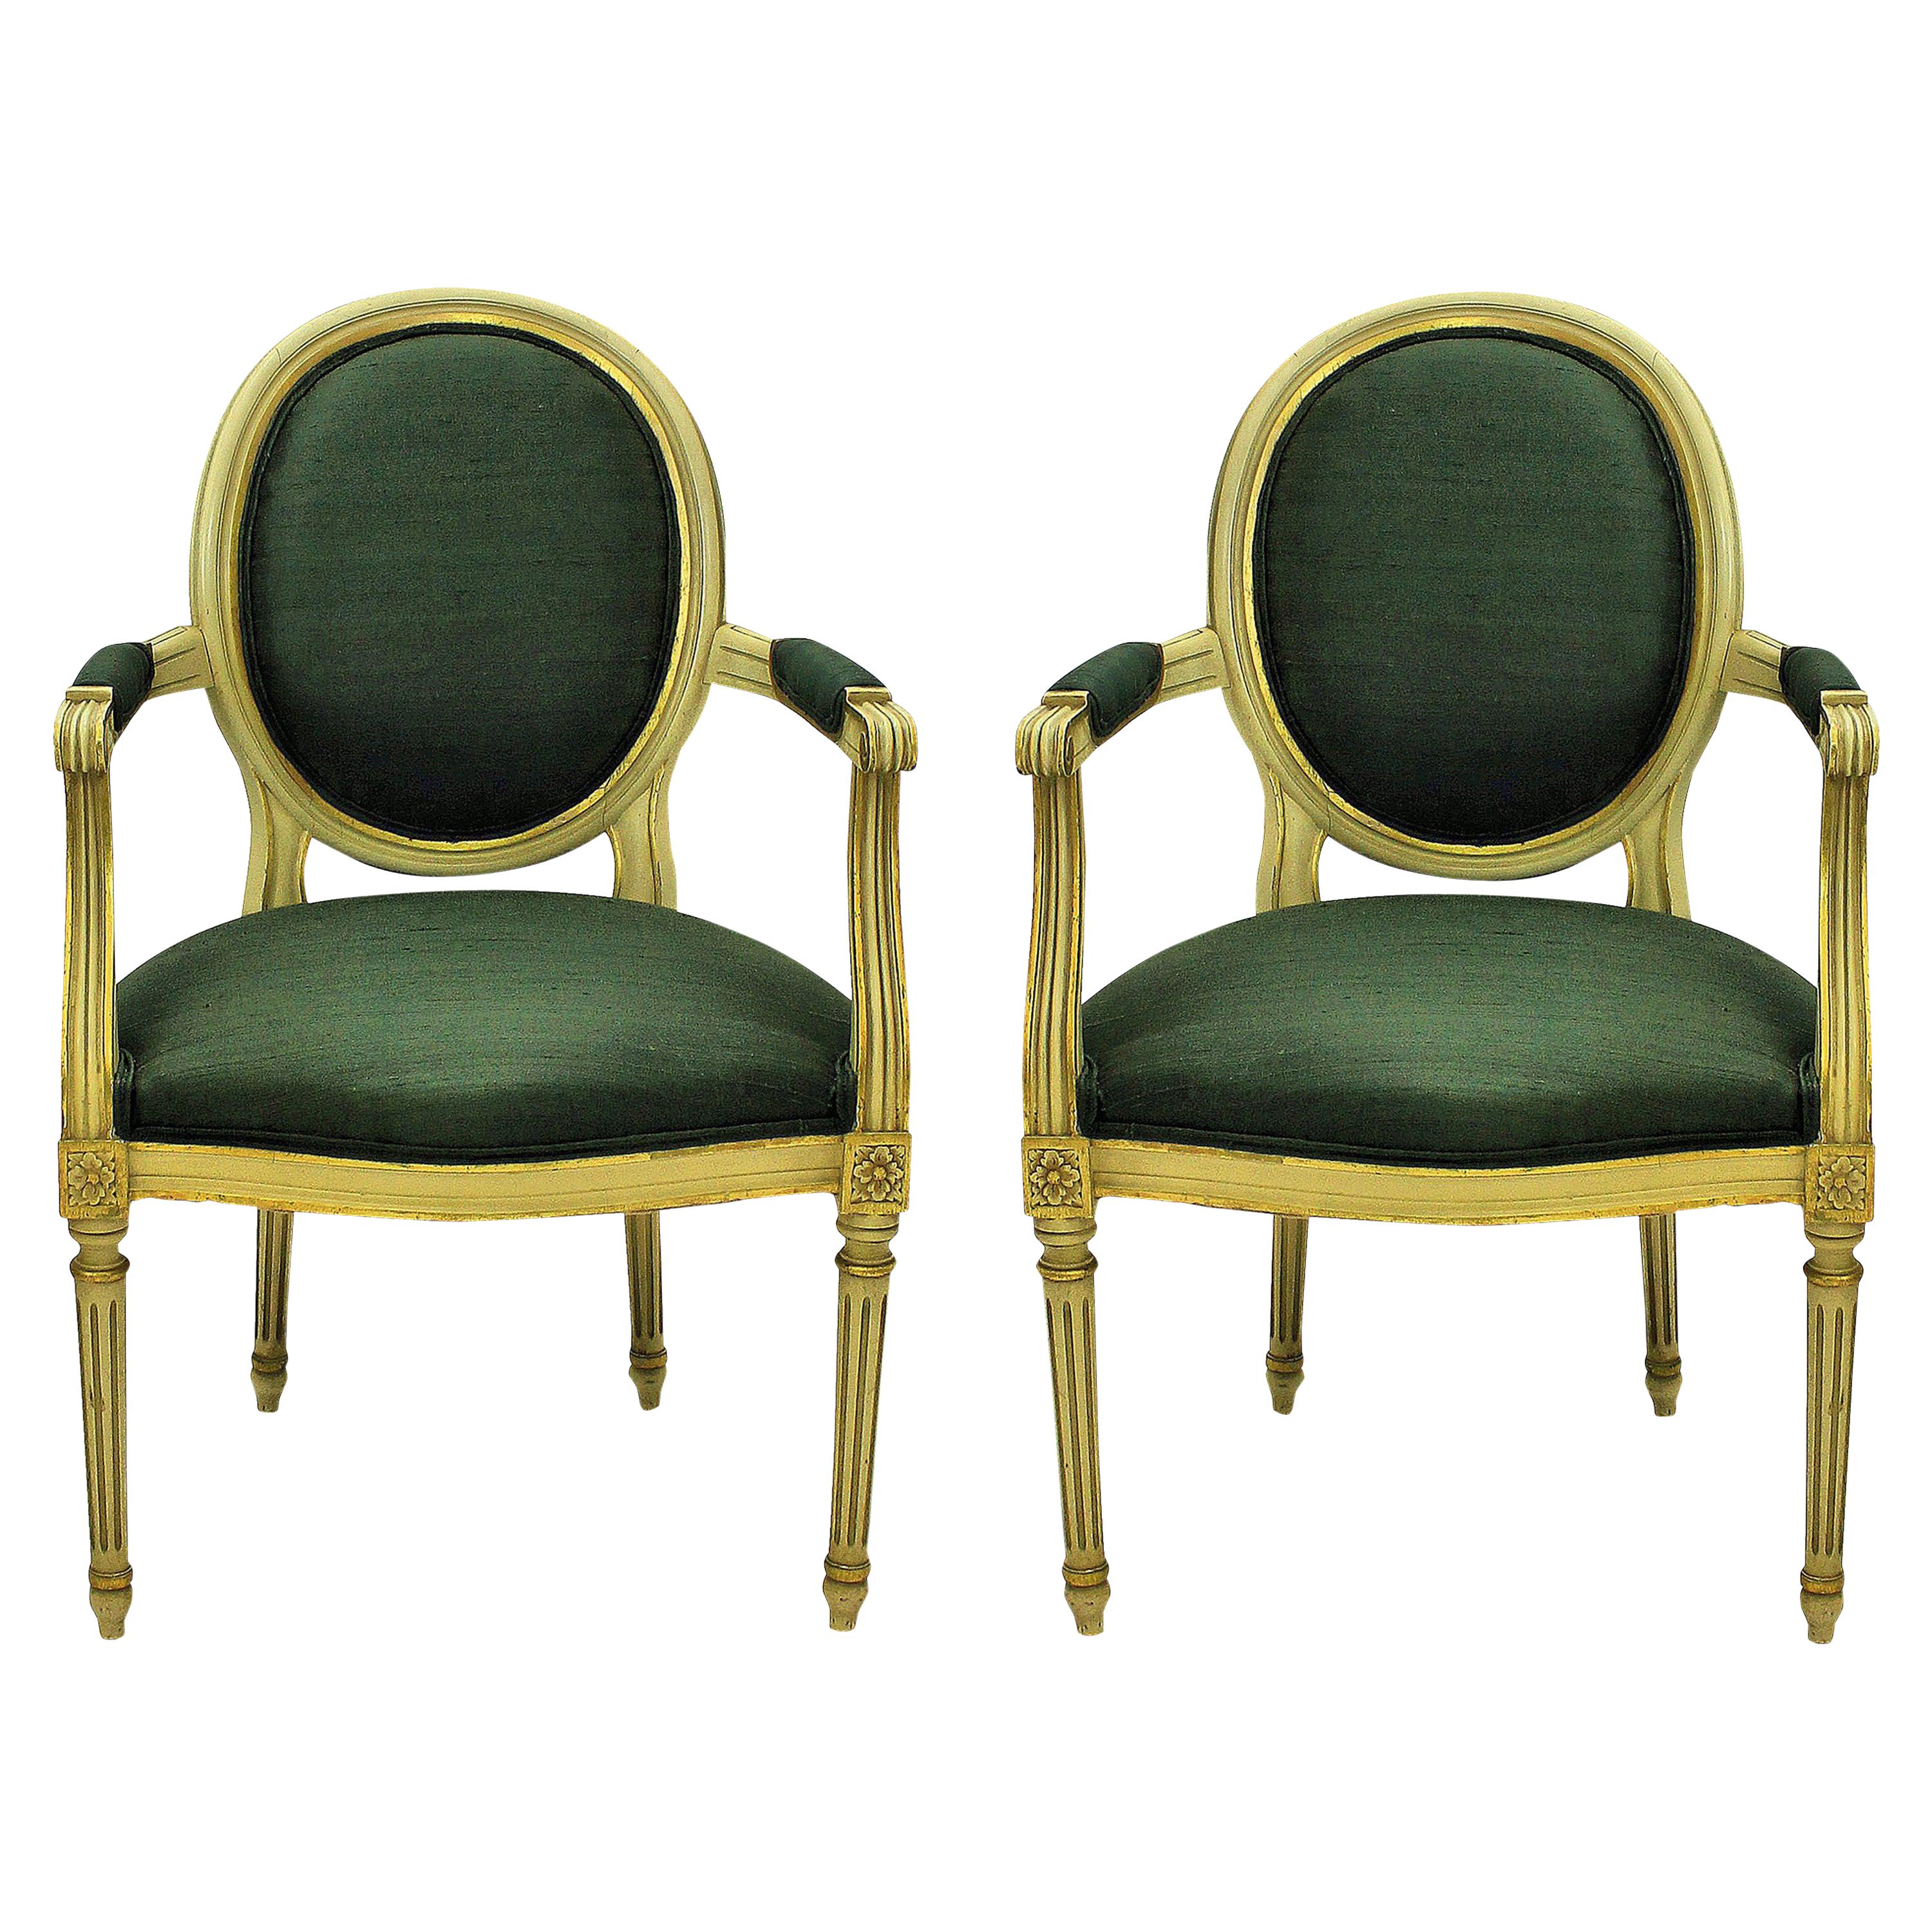 Pair of Louis XV Style Painted and Gilded Armchairs in Sage Green Silk